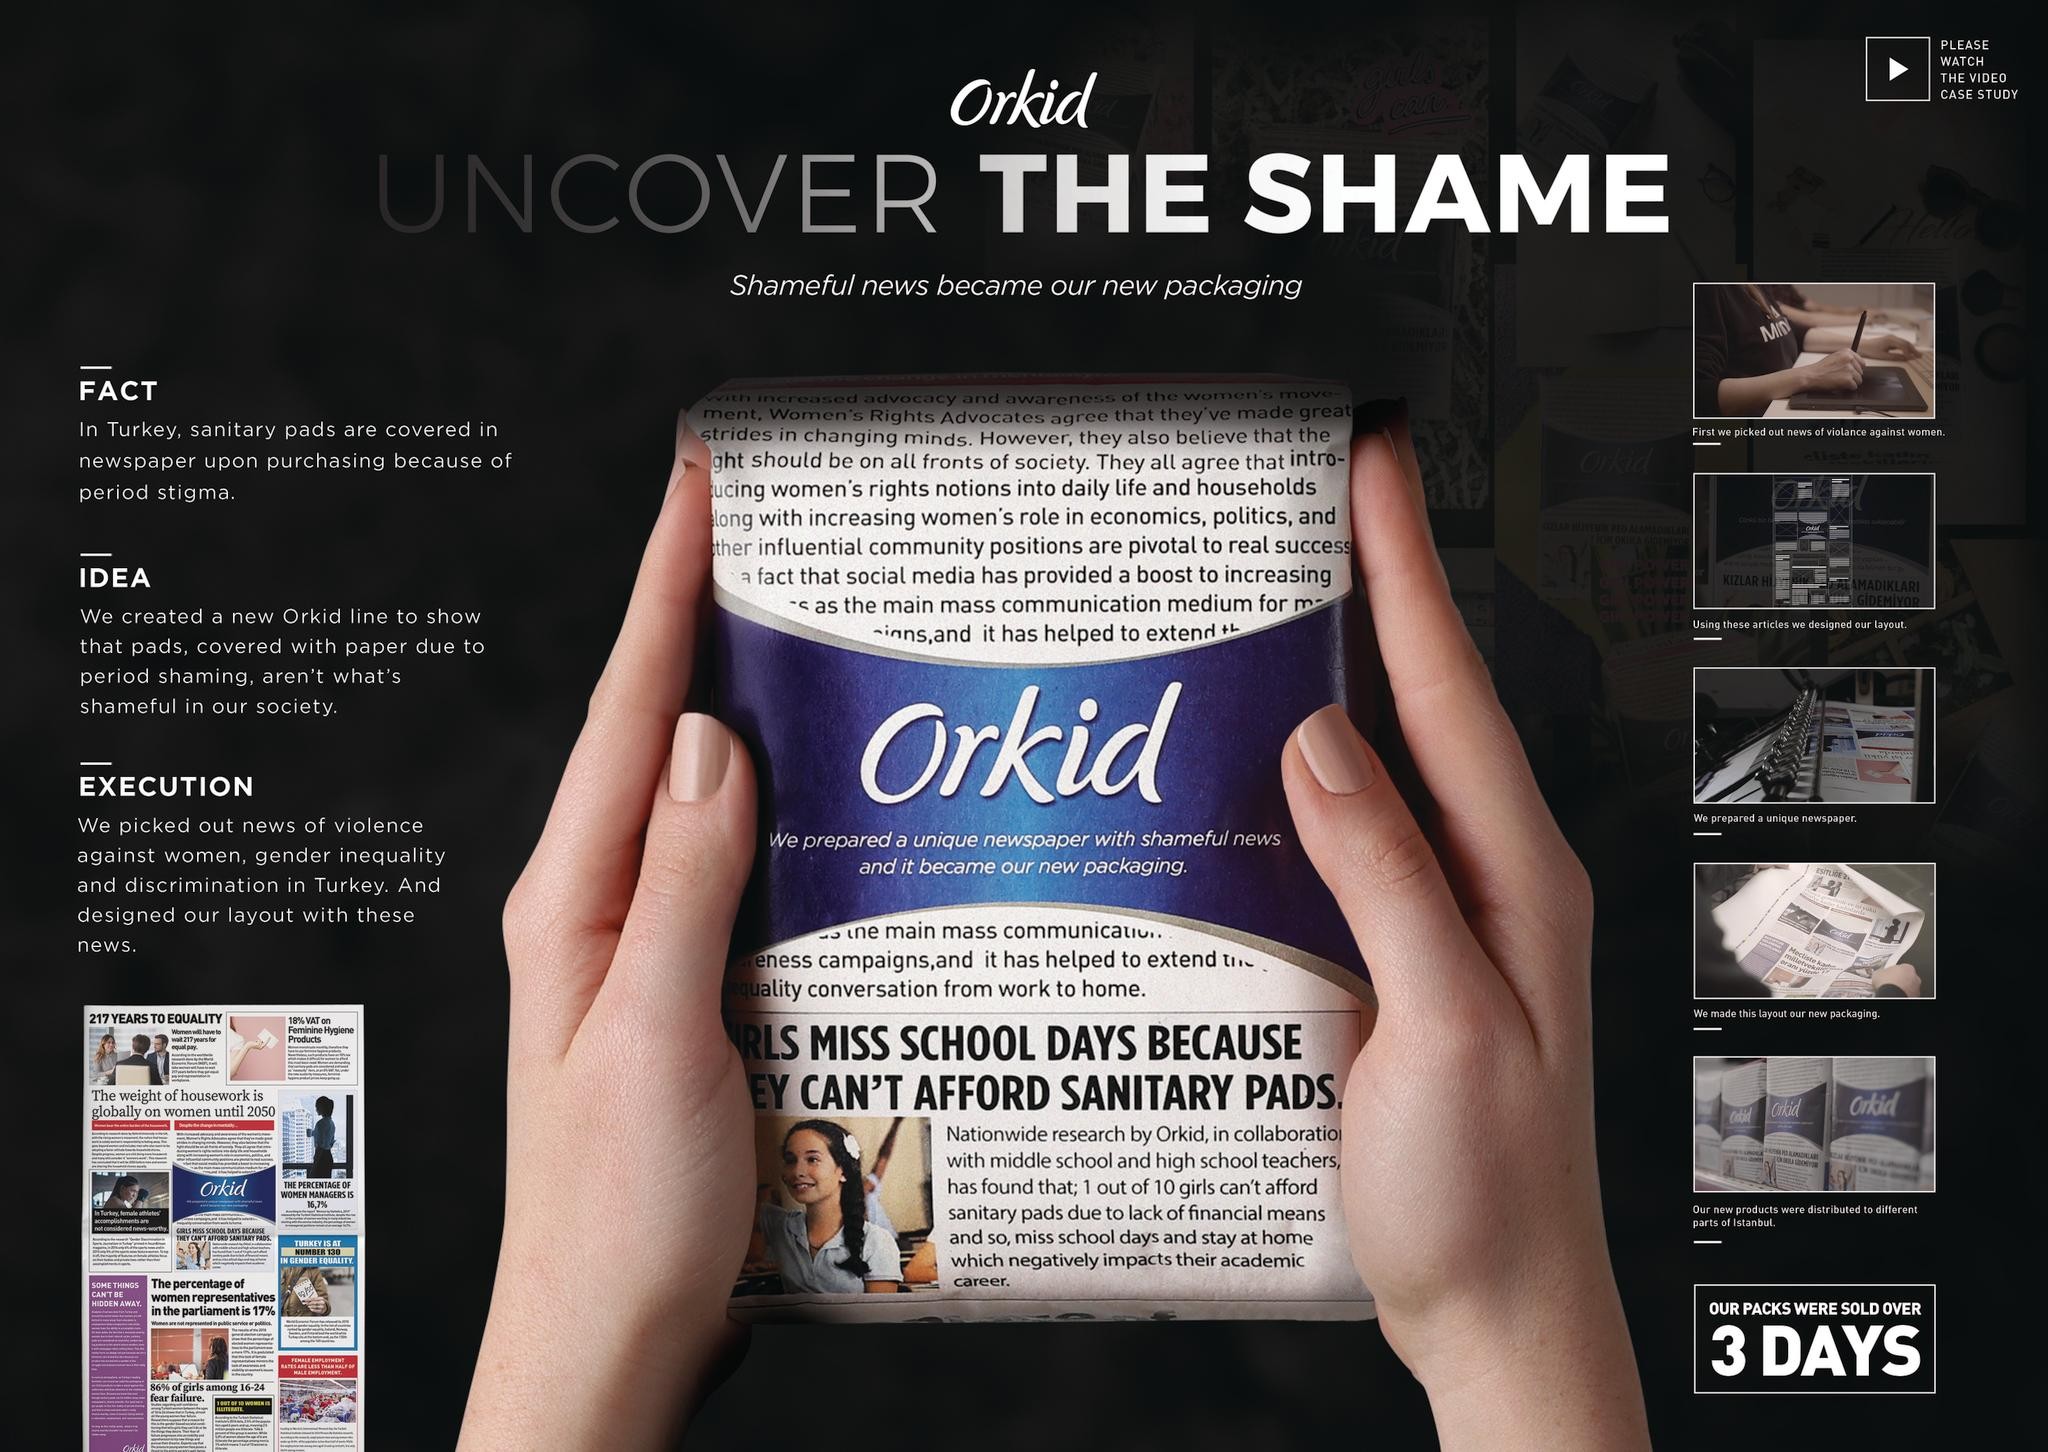 P&G ORKID - UNCOVER THE SHAME